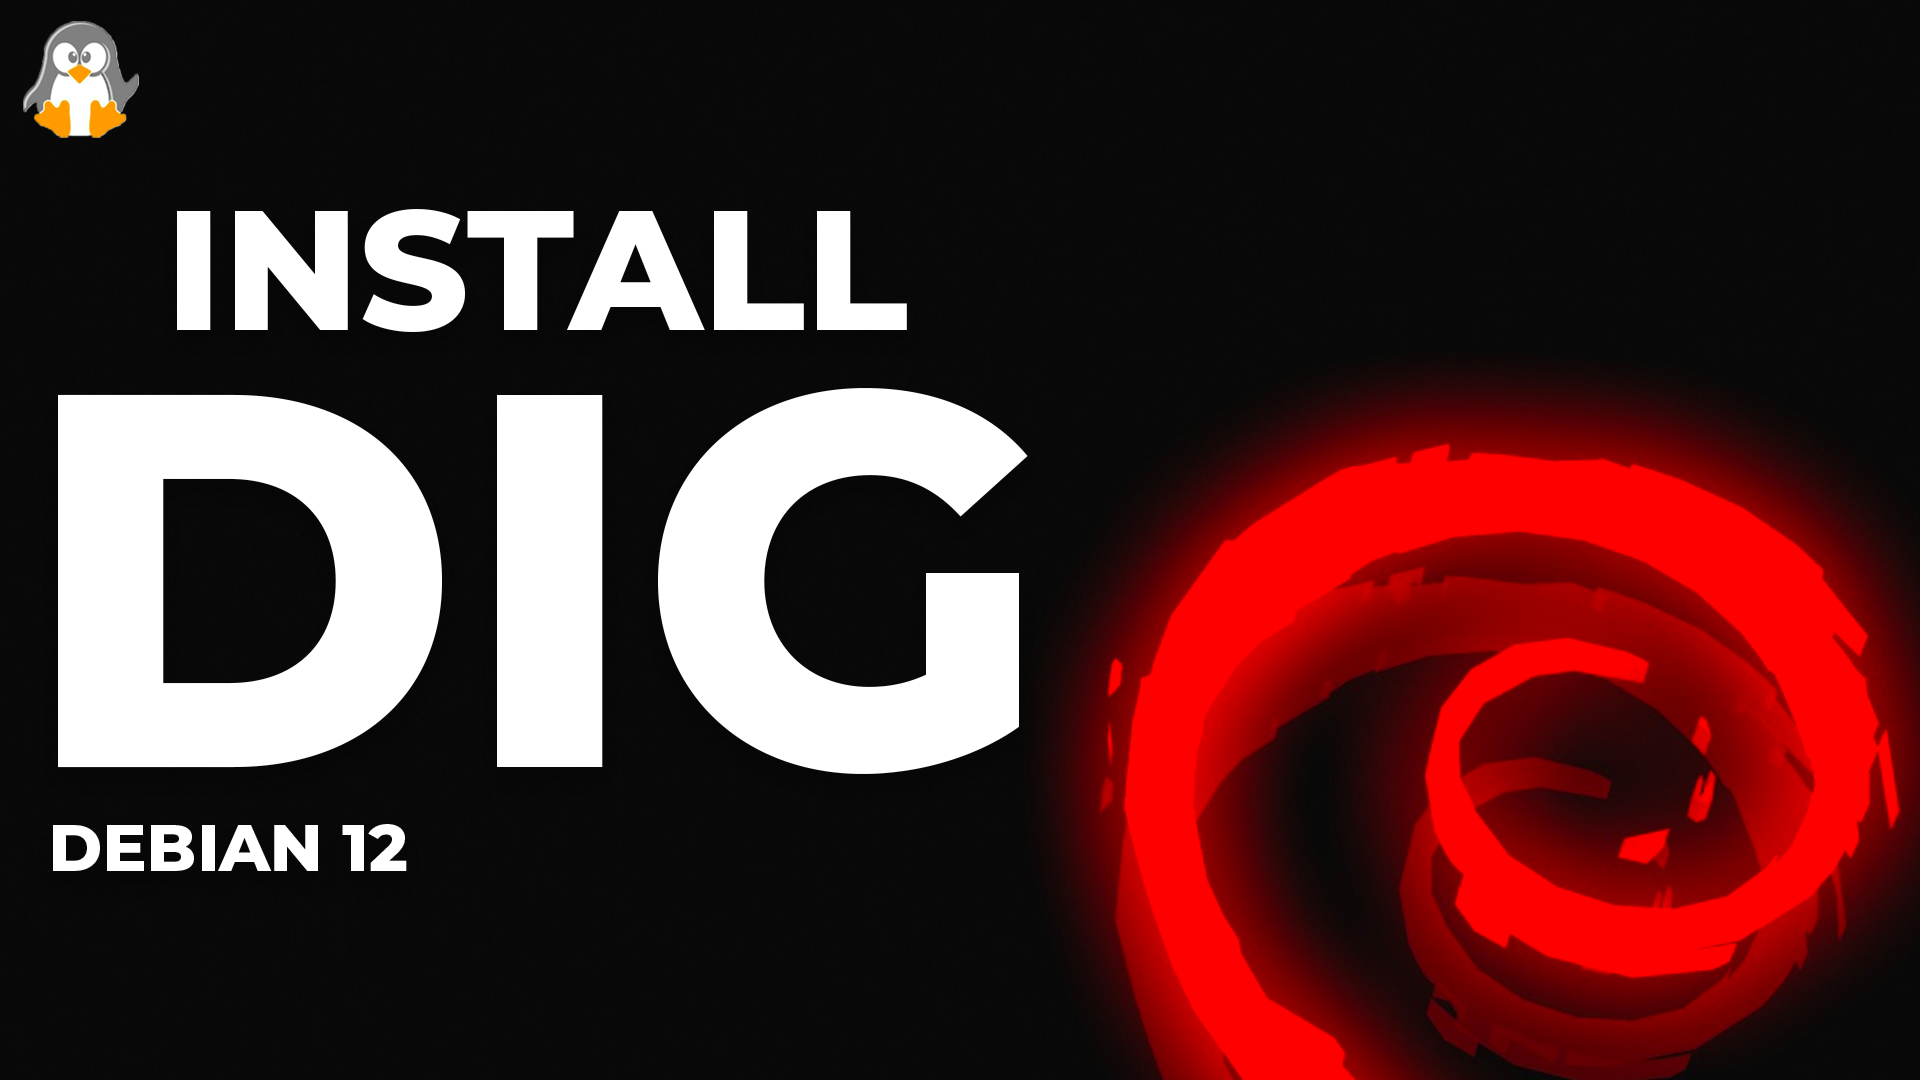 How to Install dig on Debian 12?